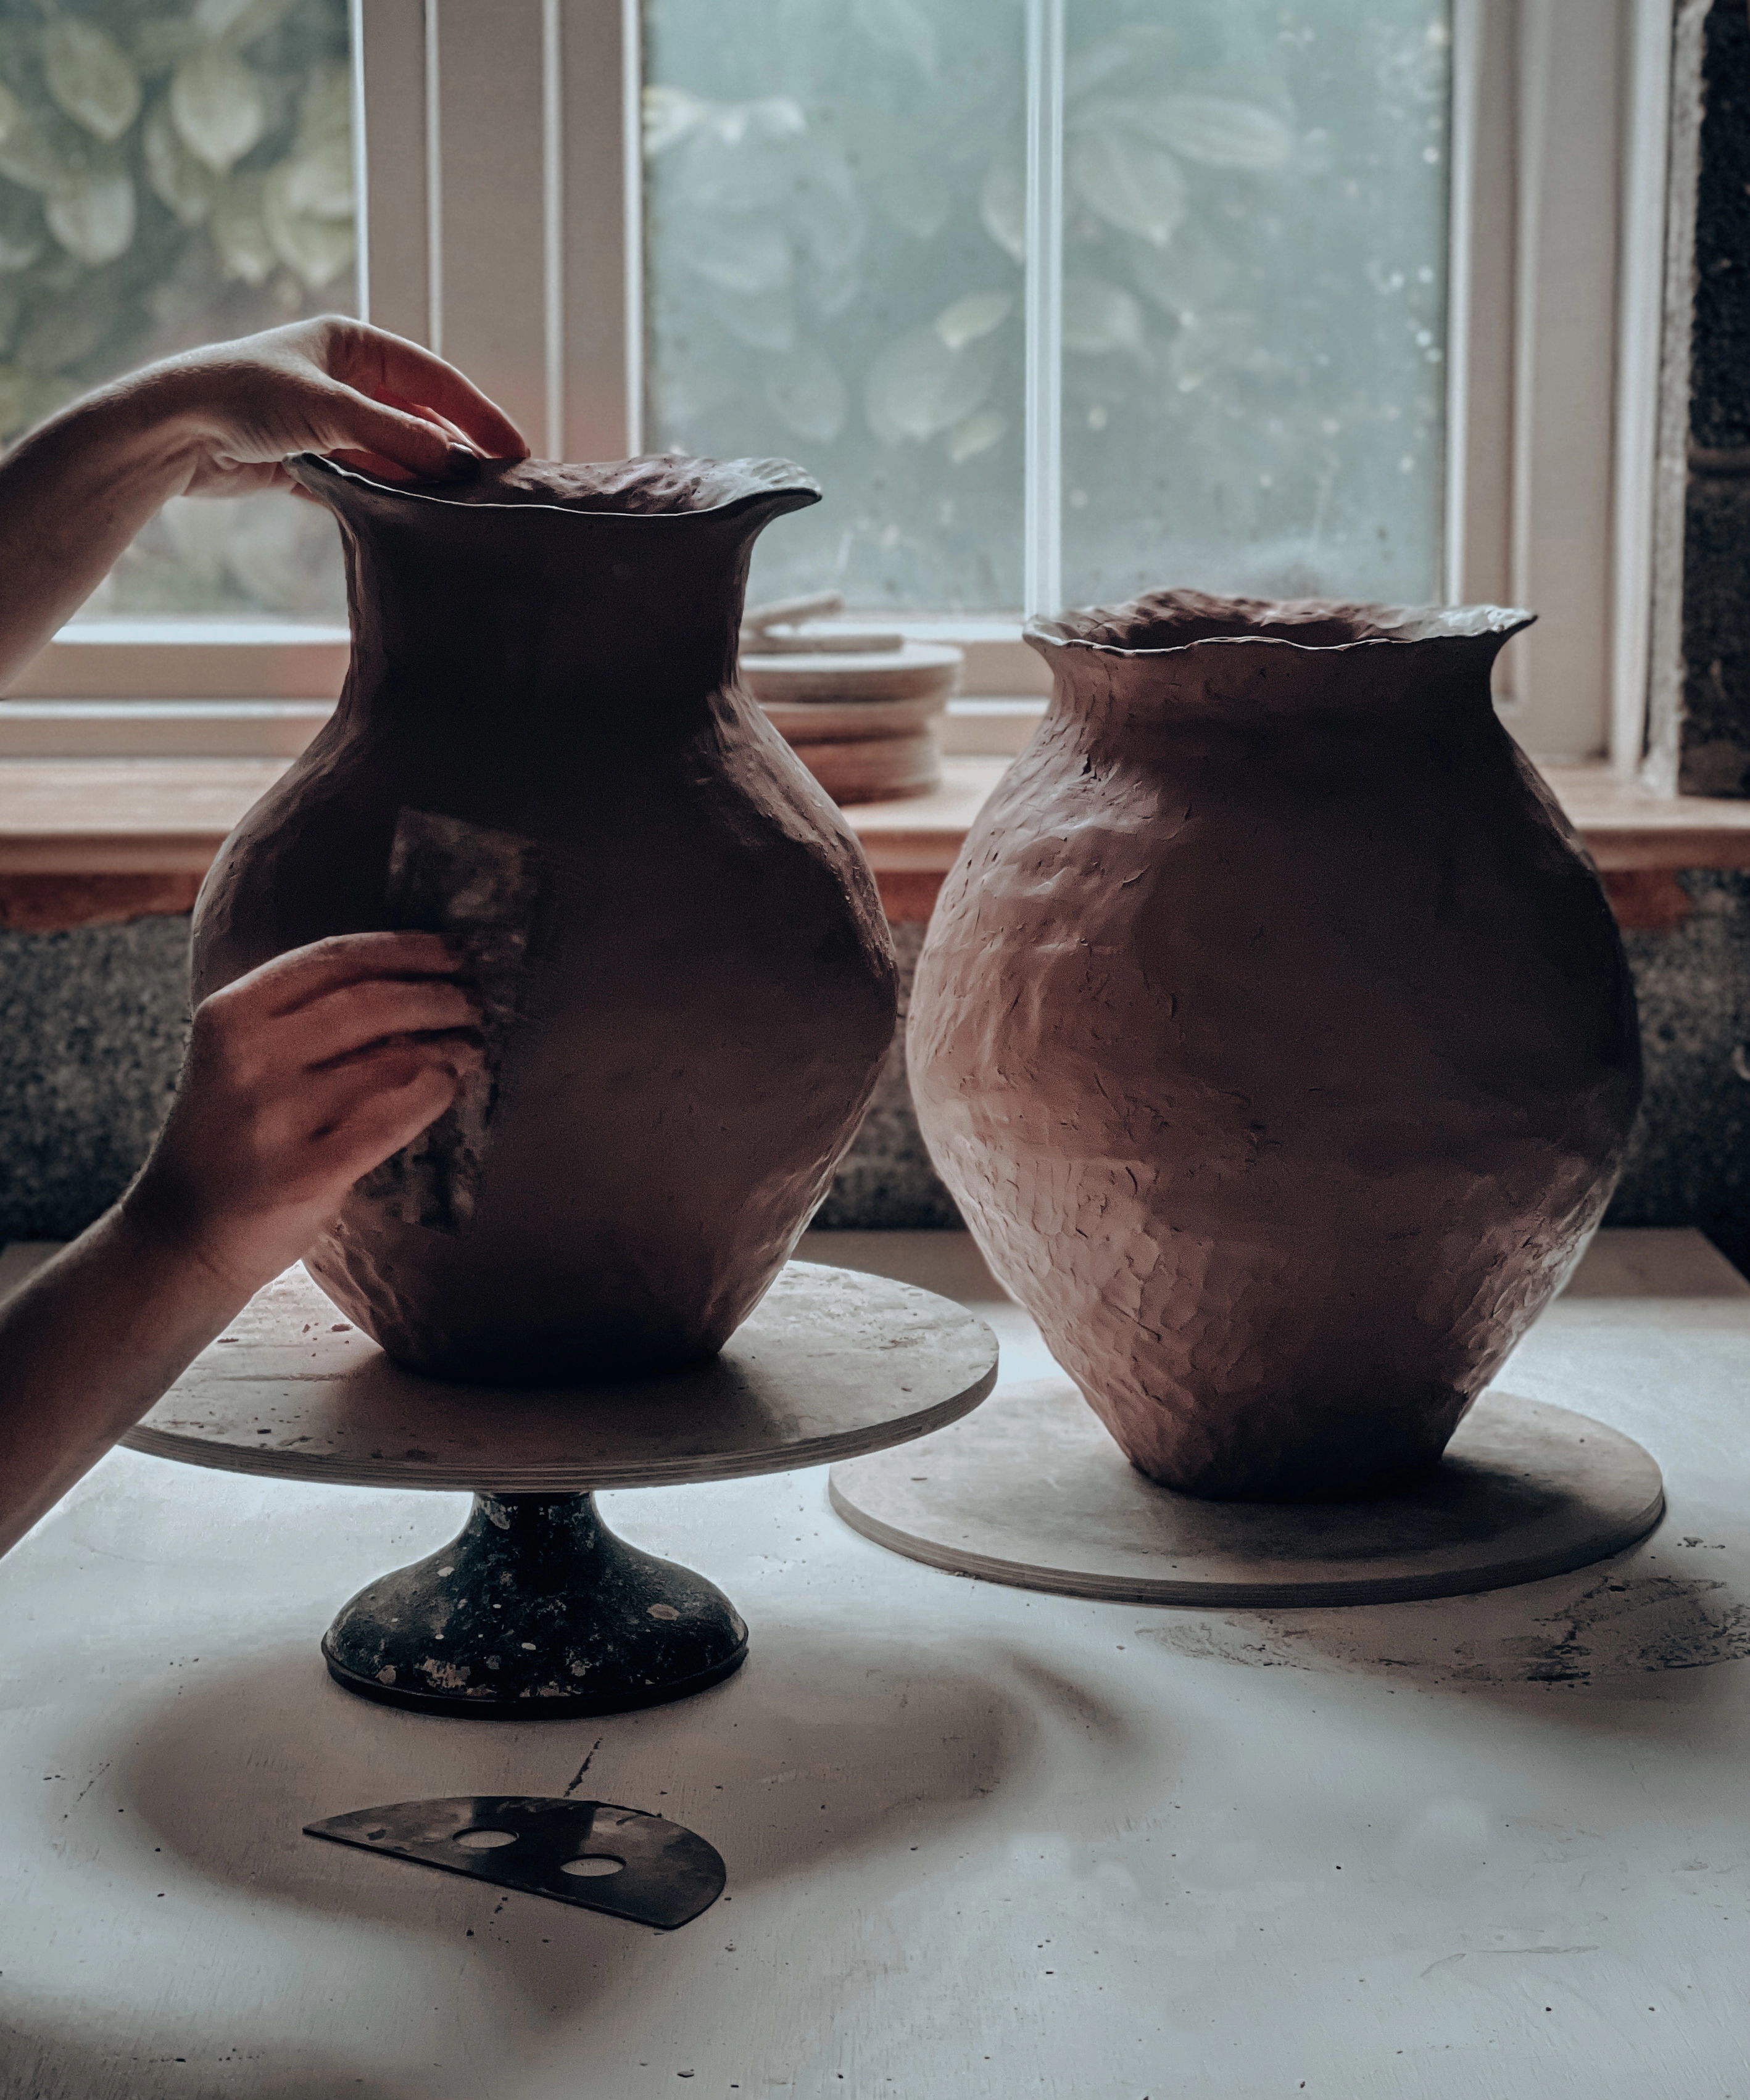 pottery hand making a vase in a pottery studio by the window